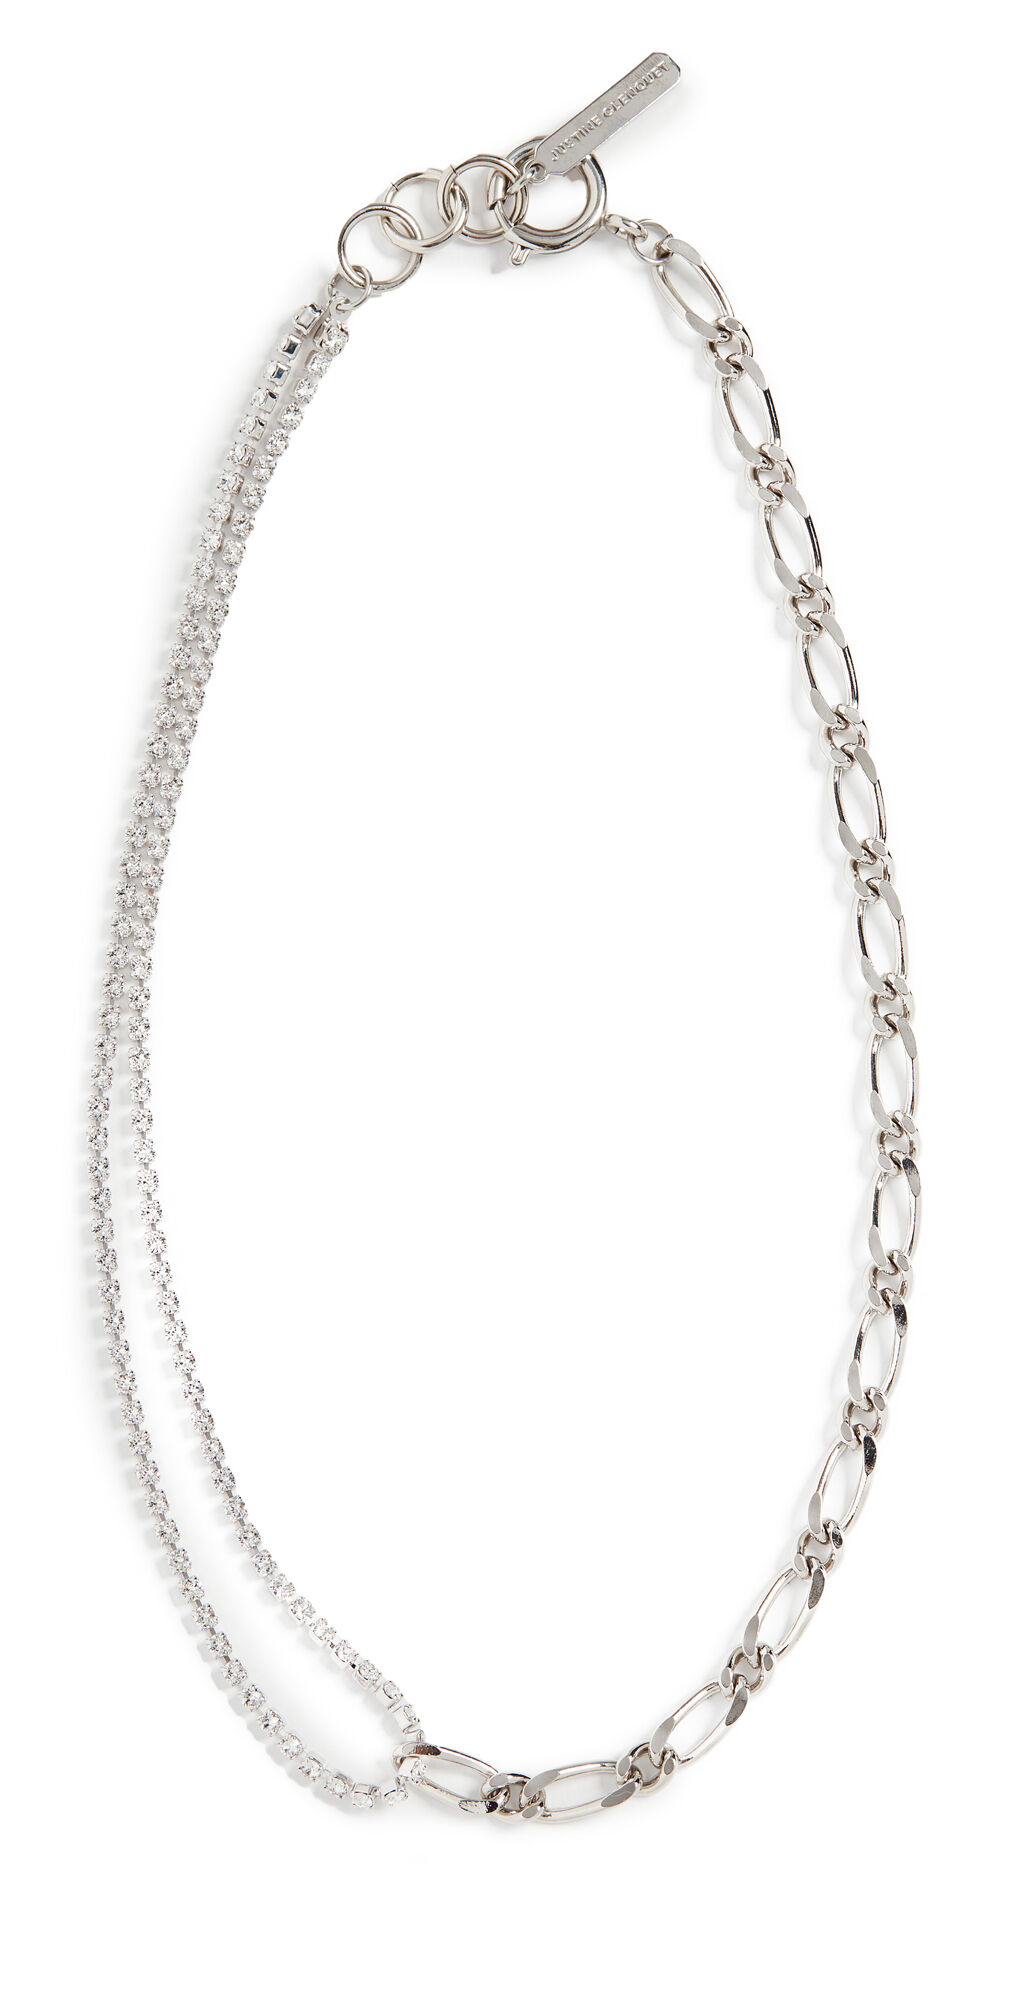 Justine Clenquet Roxy Choker Silver One Size  Silver  size:One Size